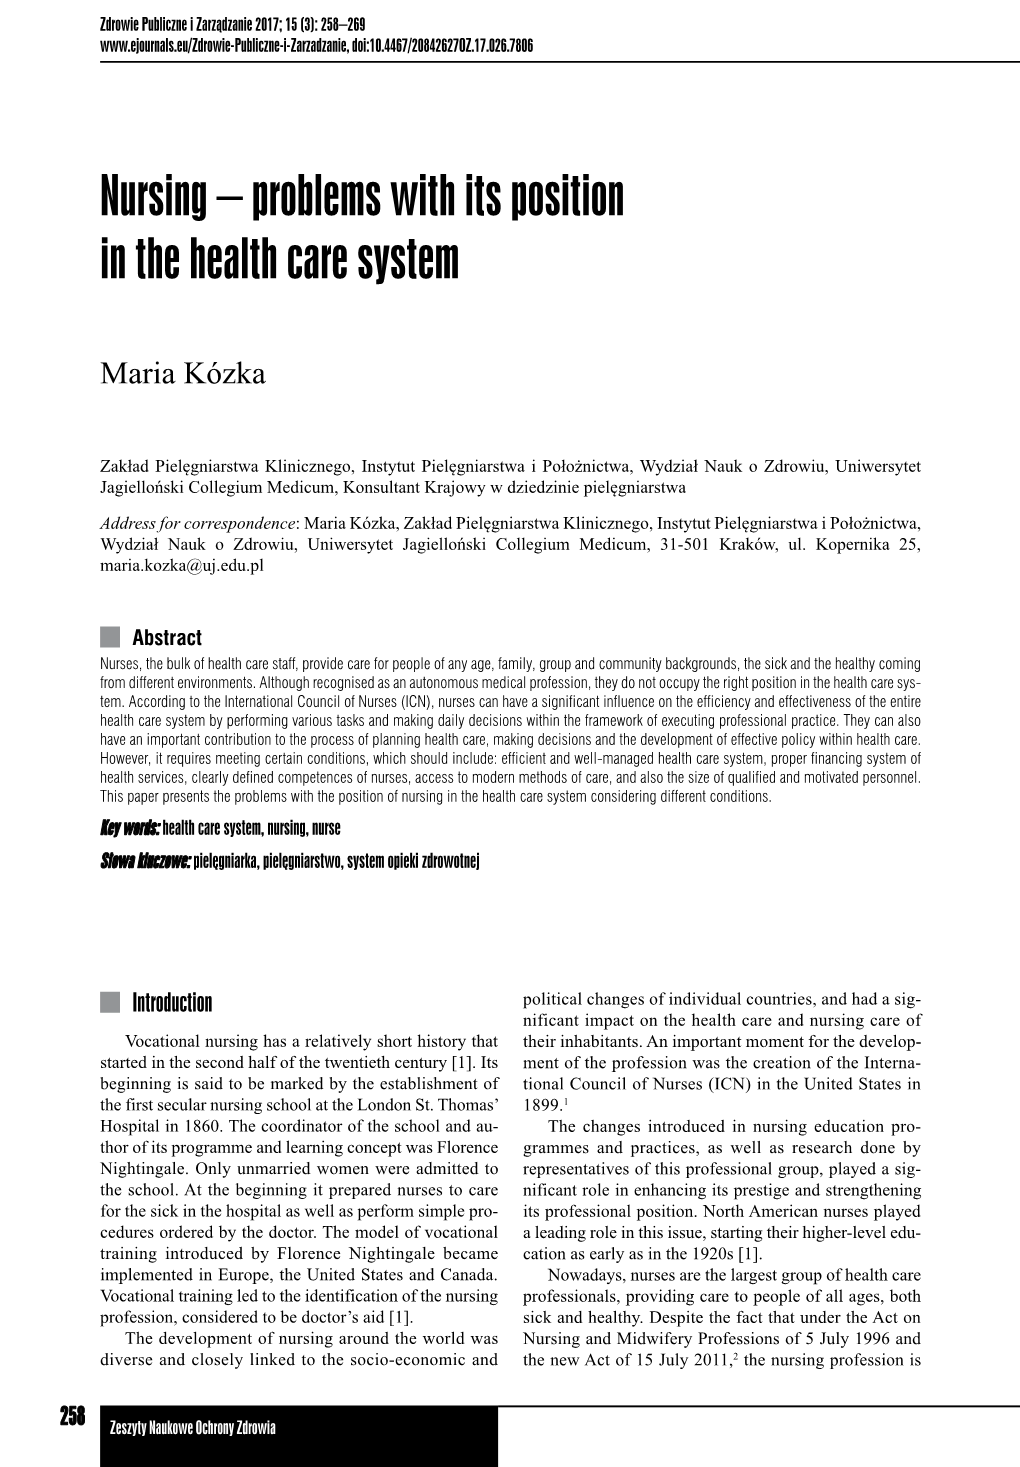 Nursing – Problems with Its Position in the Health Care System